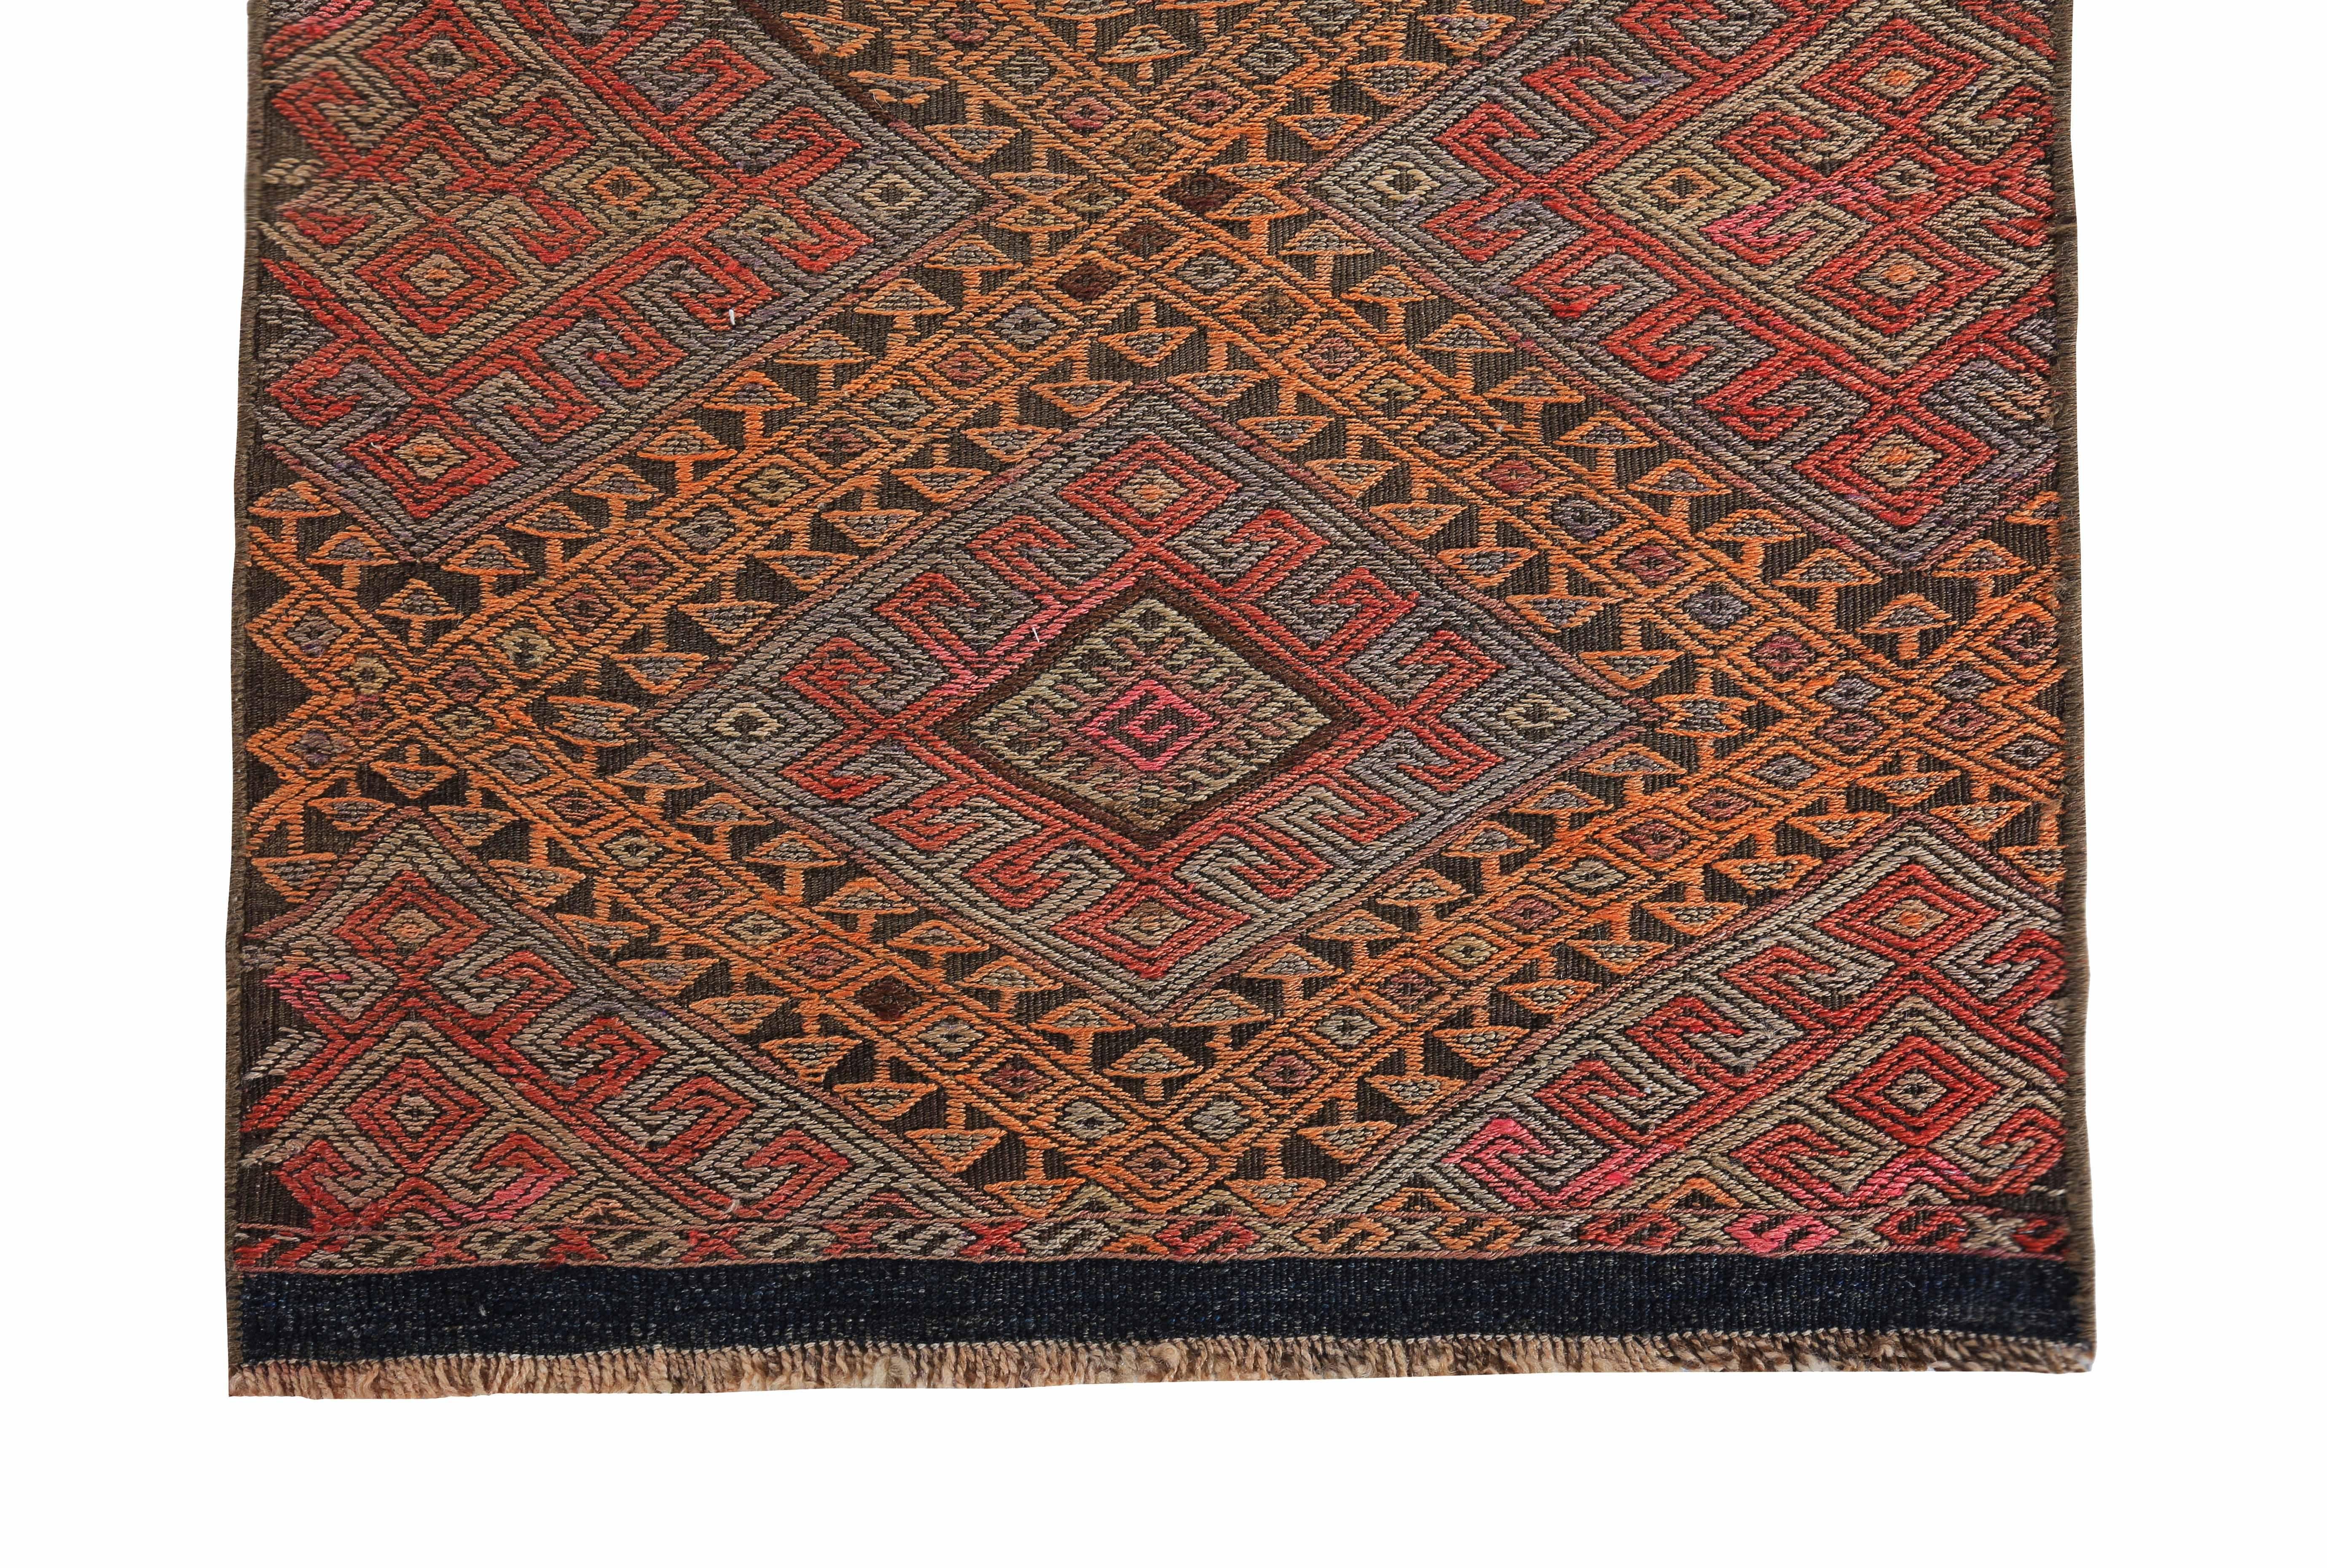 Modern Turkish Kilim Runner Rug with Orange and Red Tribal Patterns In New Condition For Sale In Dallas, TX